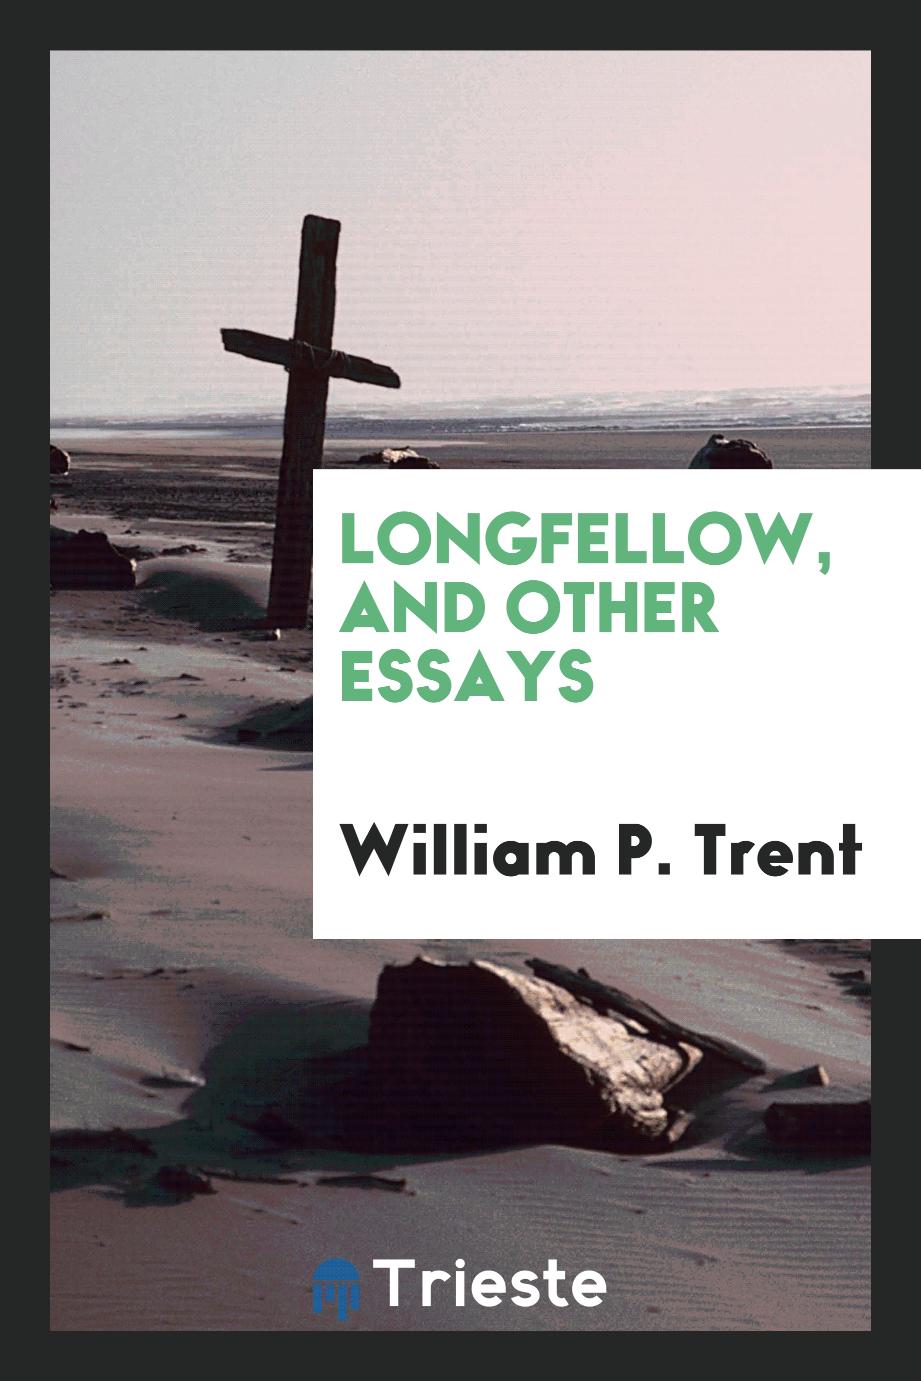 Longfellow, and other essays